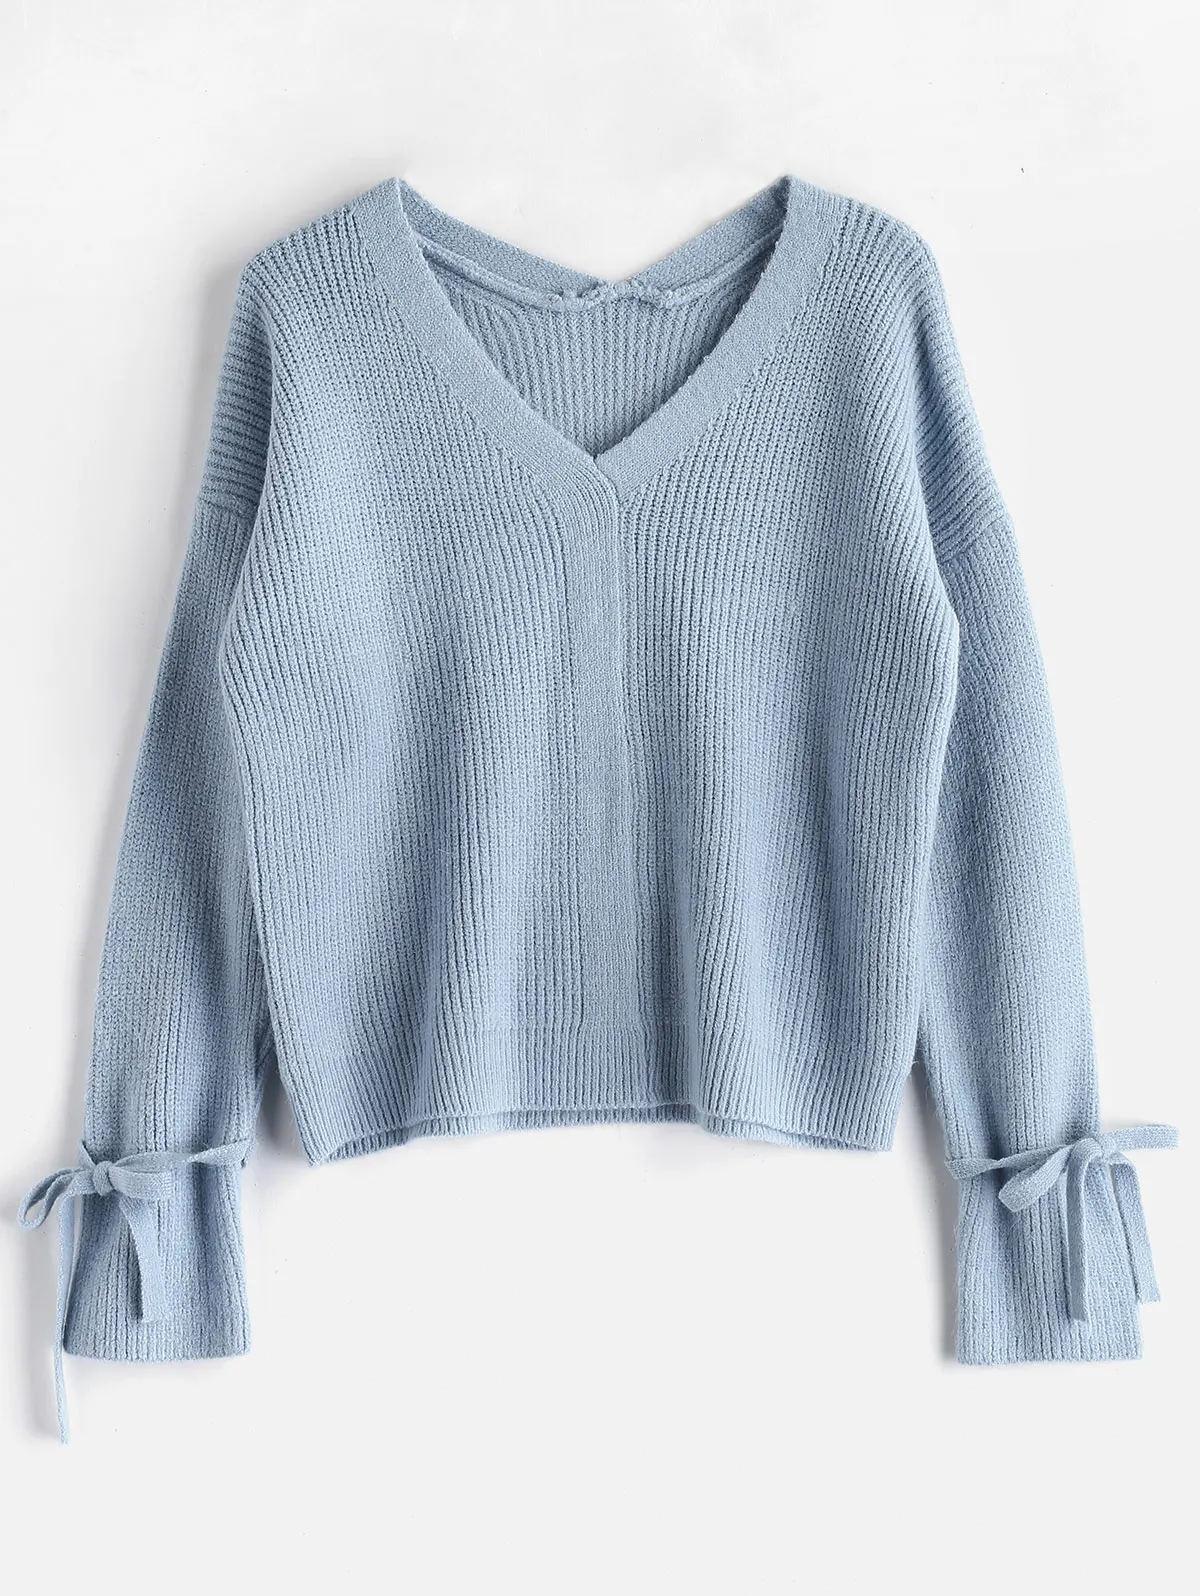 ZAFUL V Neck Tied Sleeve Boxy Sweater Knitted Textured Women Pullover ...